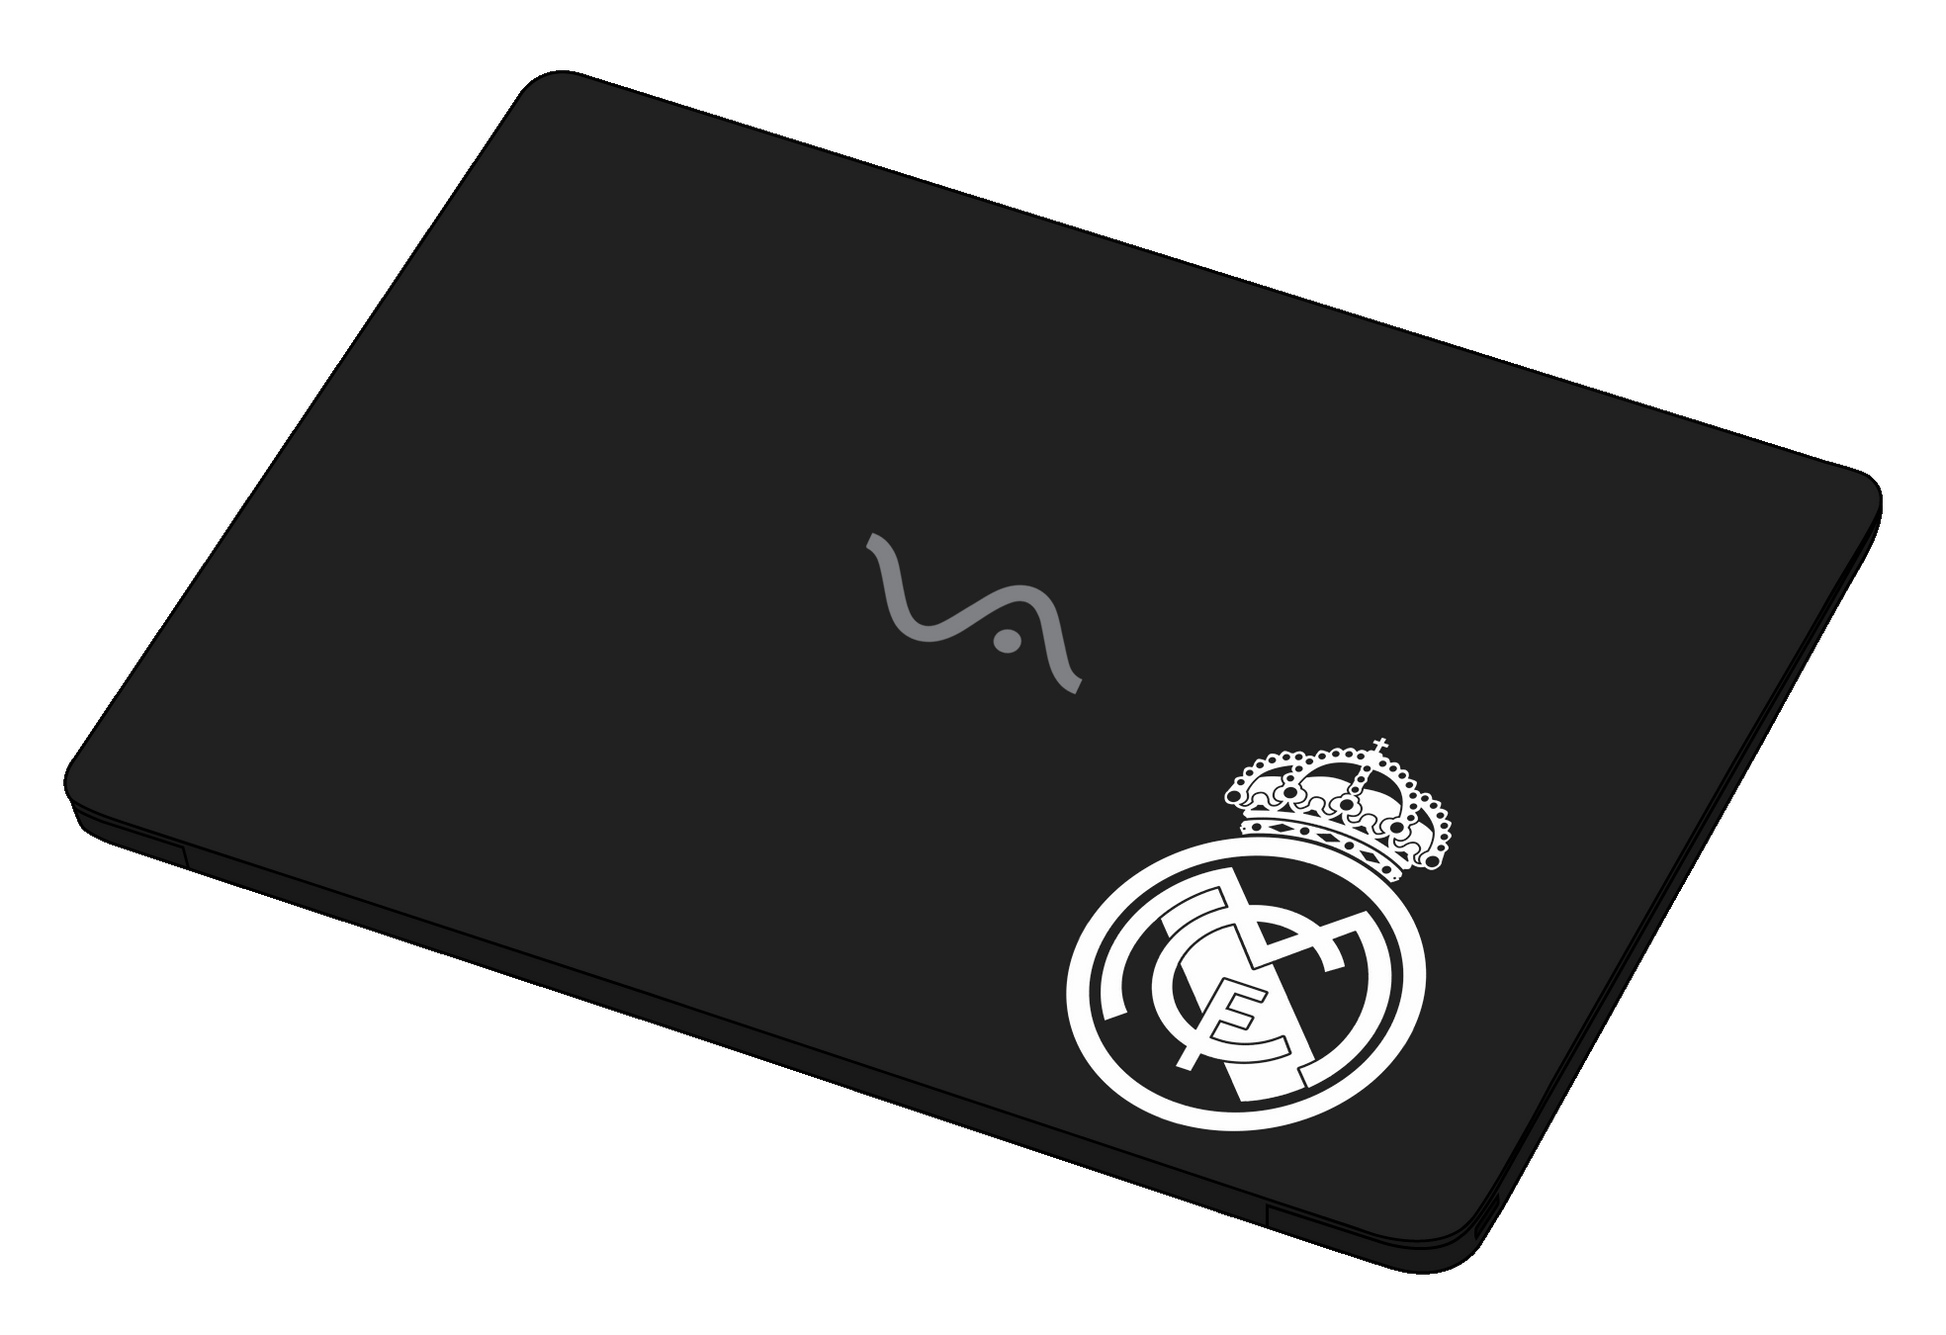 Real madrid logo sticker-Decal-]-Best laptop stickers in Egypt.-sticktop